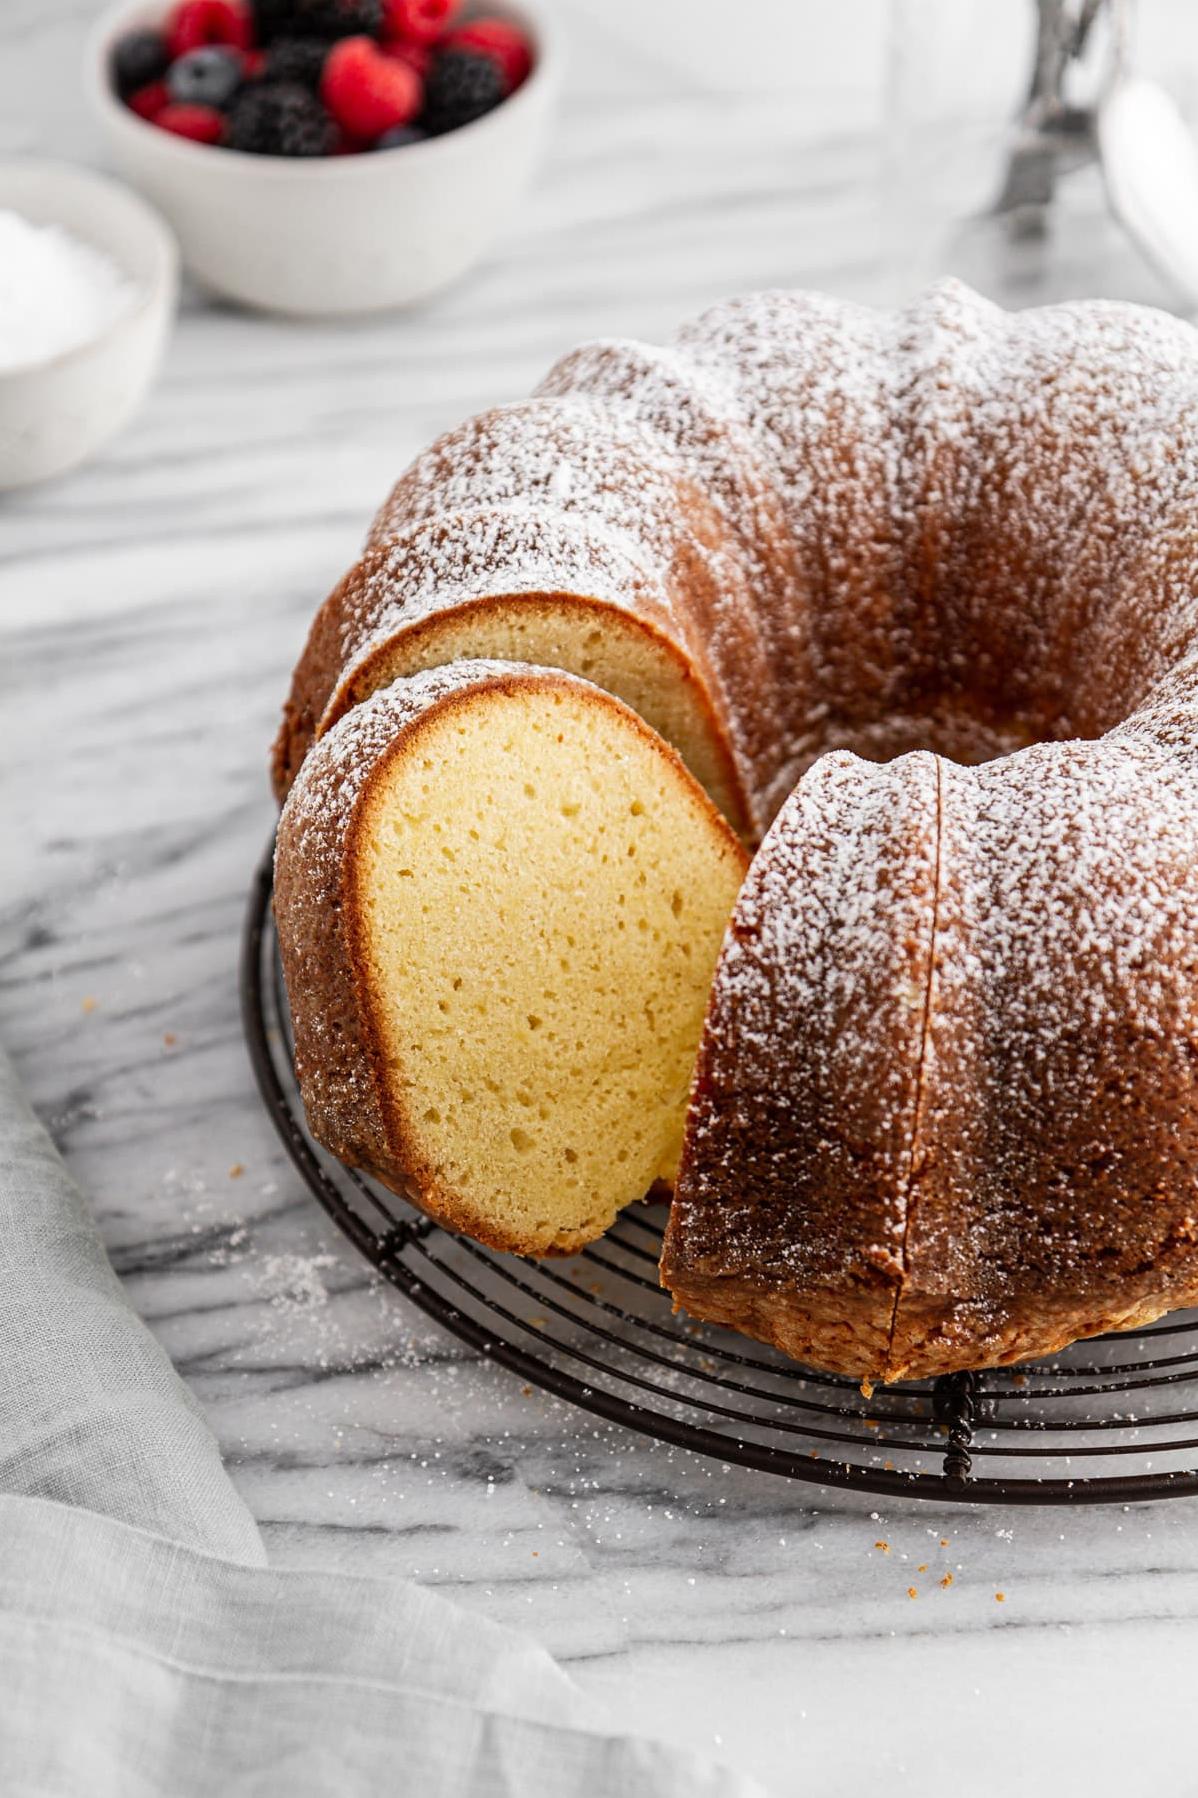  A slice of this scrumptious fat-free pound cake can turn any dull day into a delightful one.